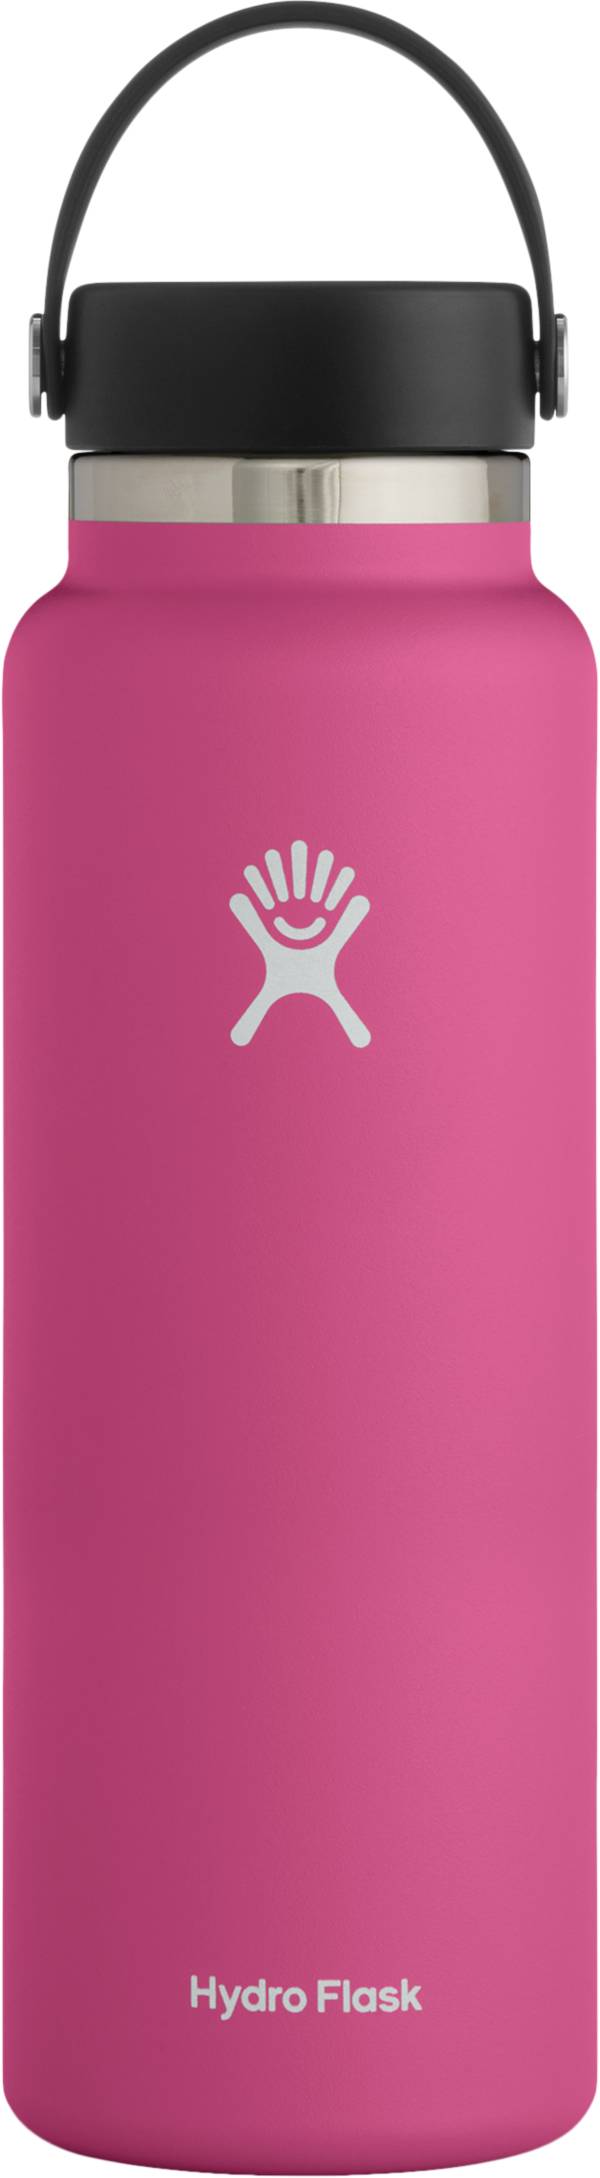 Hydro Flask Wide Mouth 40 oz. Bottle product image